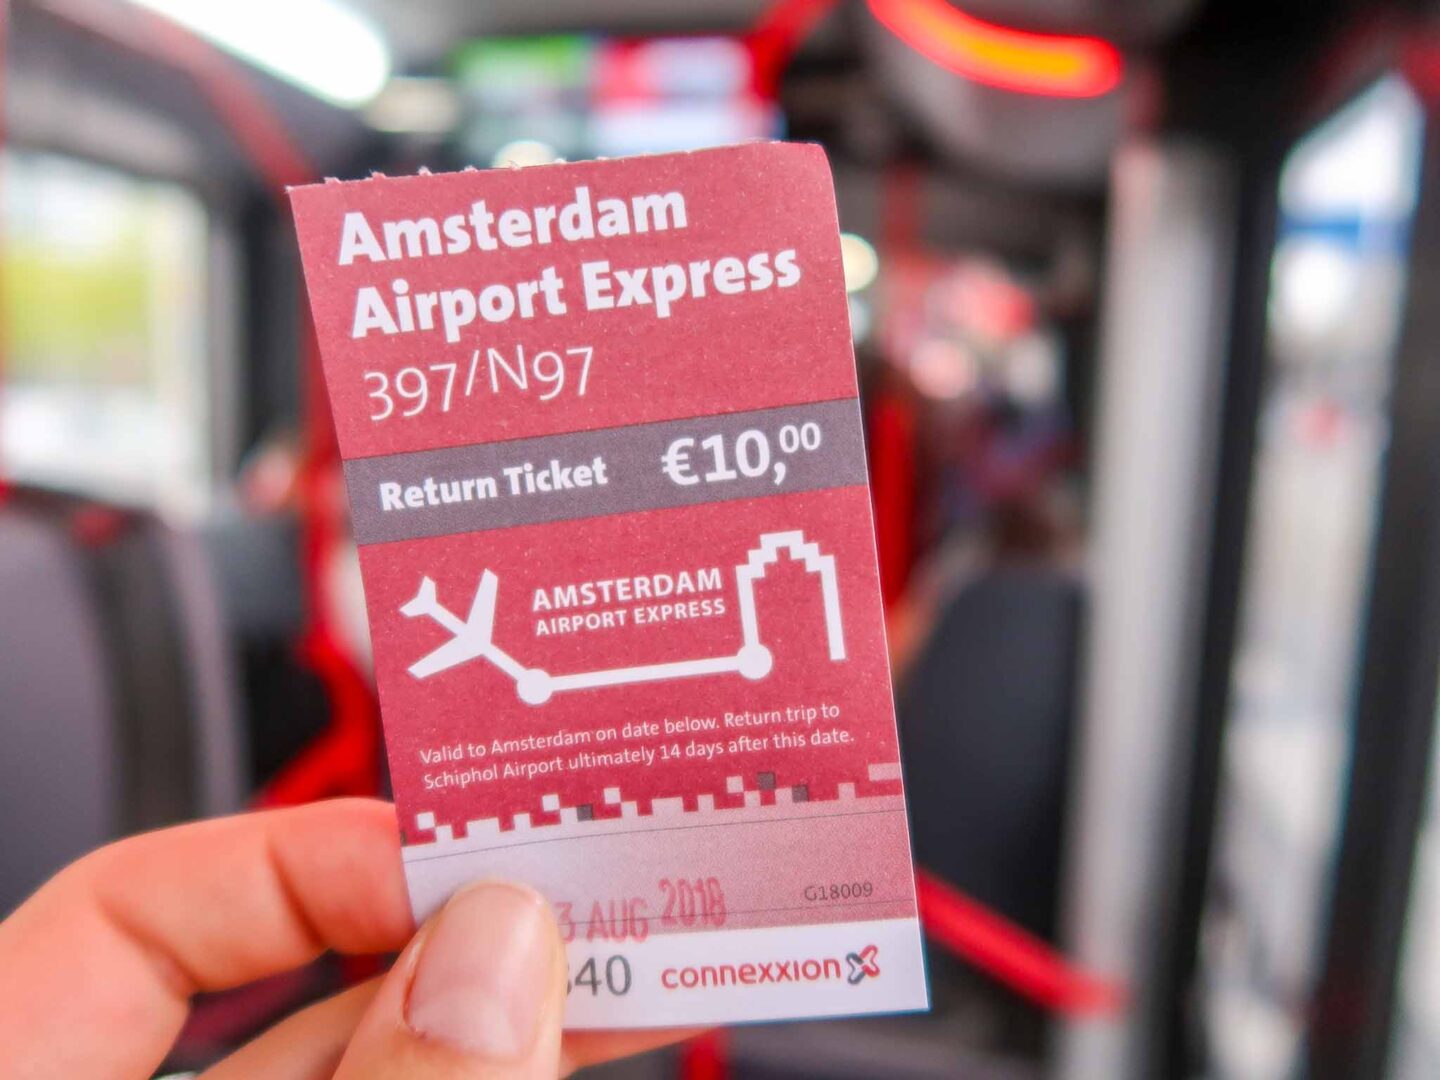 Amsterdam on a budget, tickets for Amsterdam airport express, getting around Amsterdam on a budget